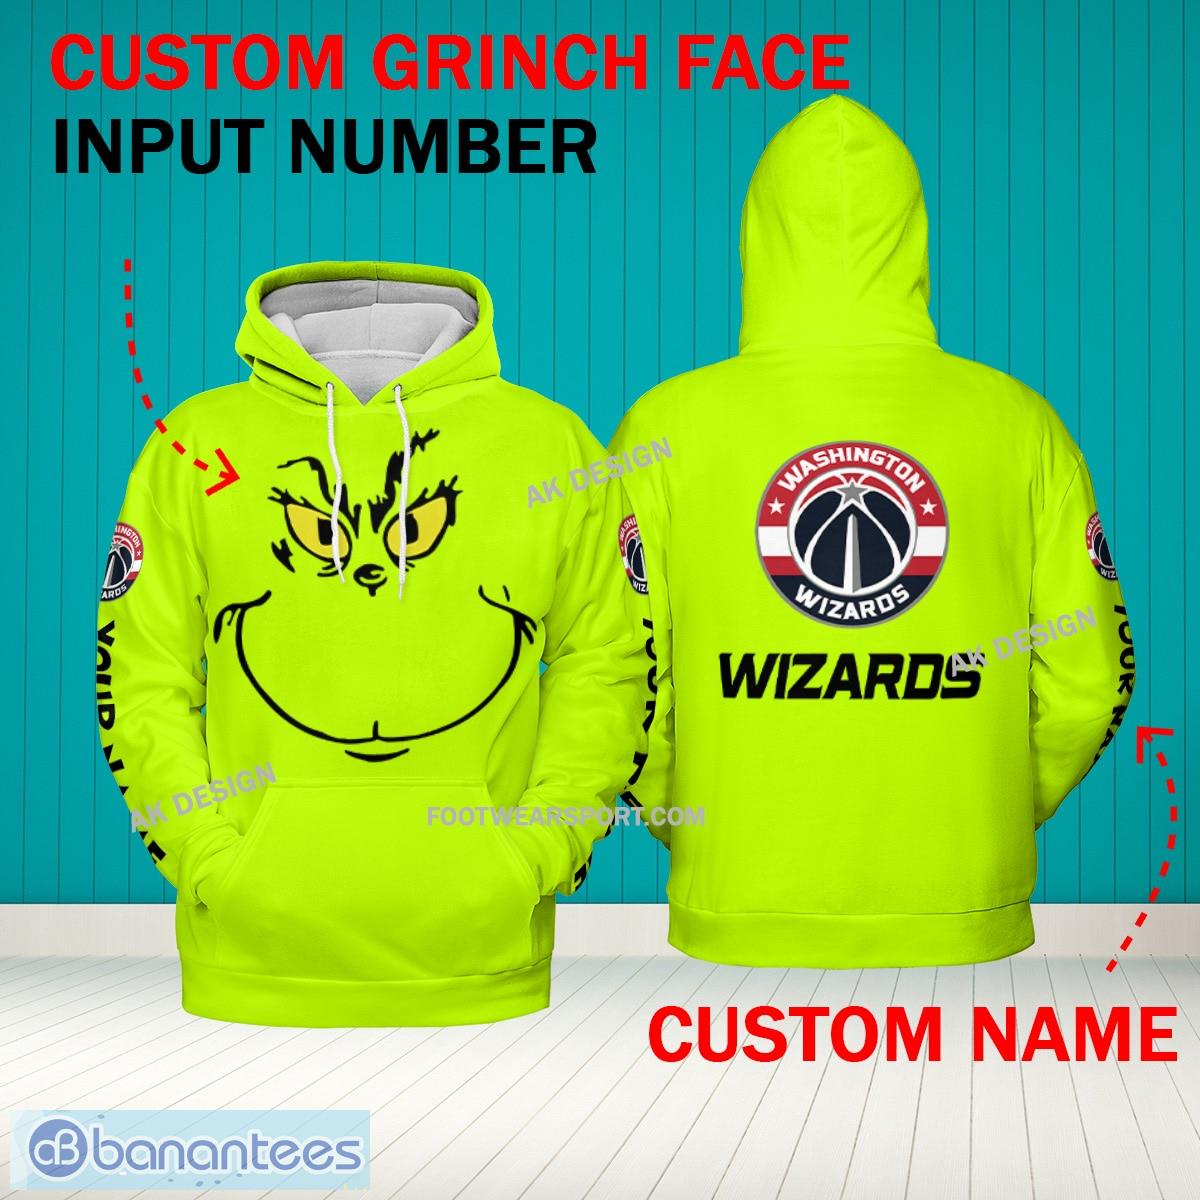 Grinch Face Washington Wizards 3D Hoodie, Zip Hoodie, Sweater Green AOP Custom Number And Name - Grinch Face NBA Washington Wizards 3D Hoodie